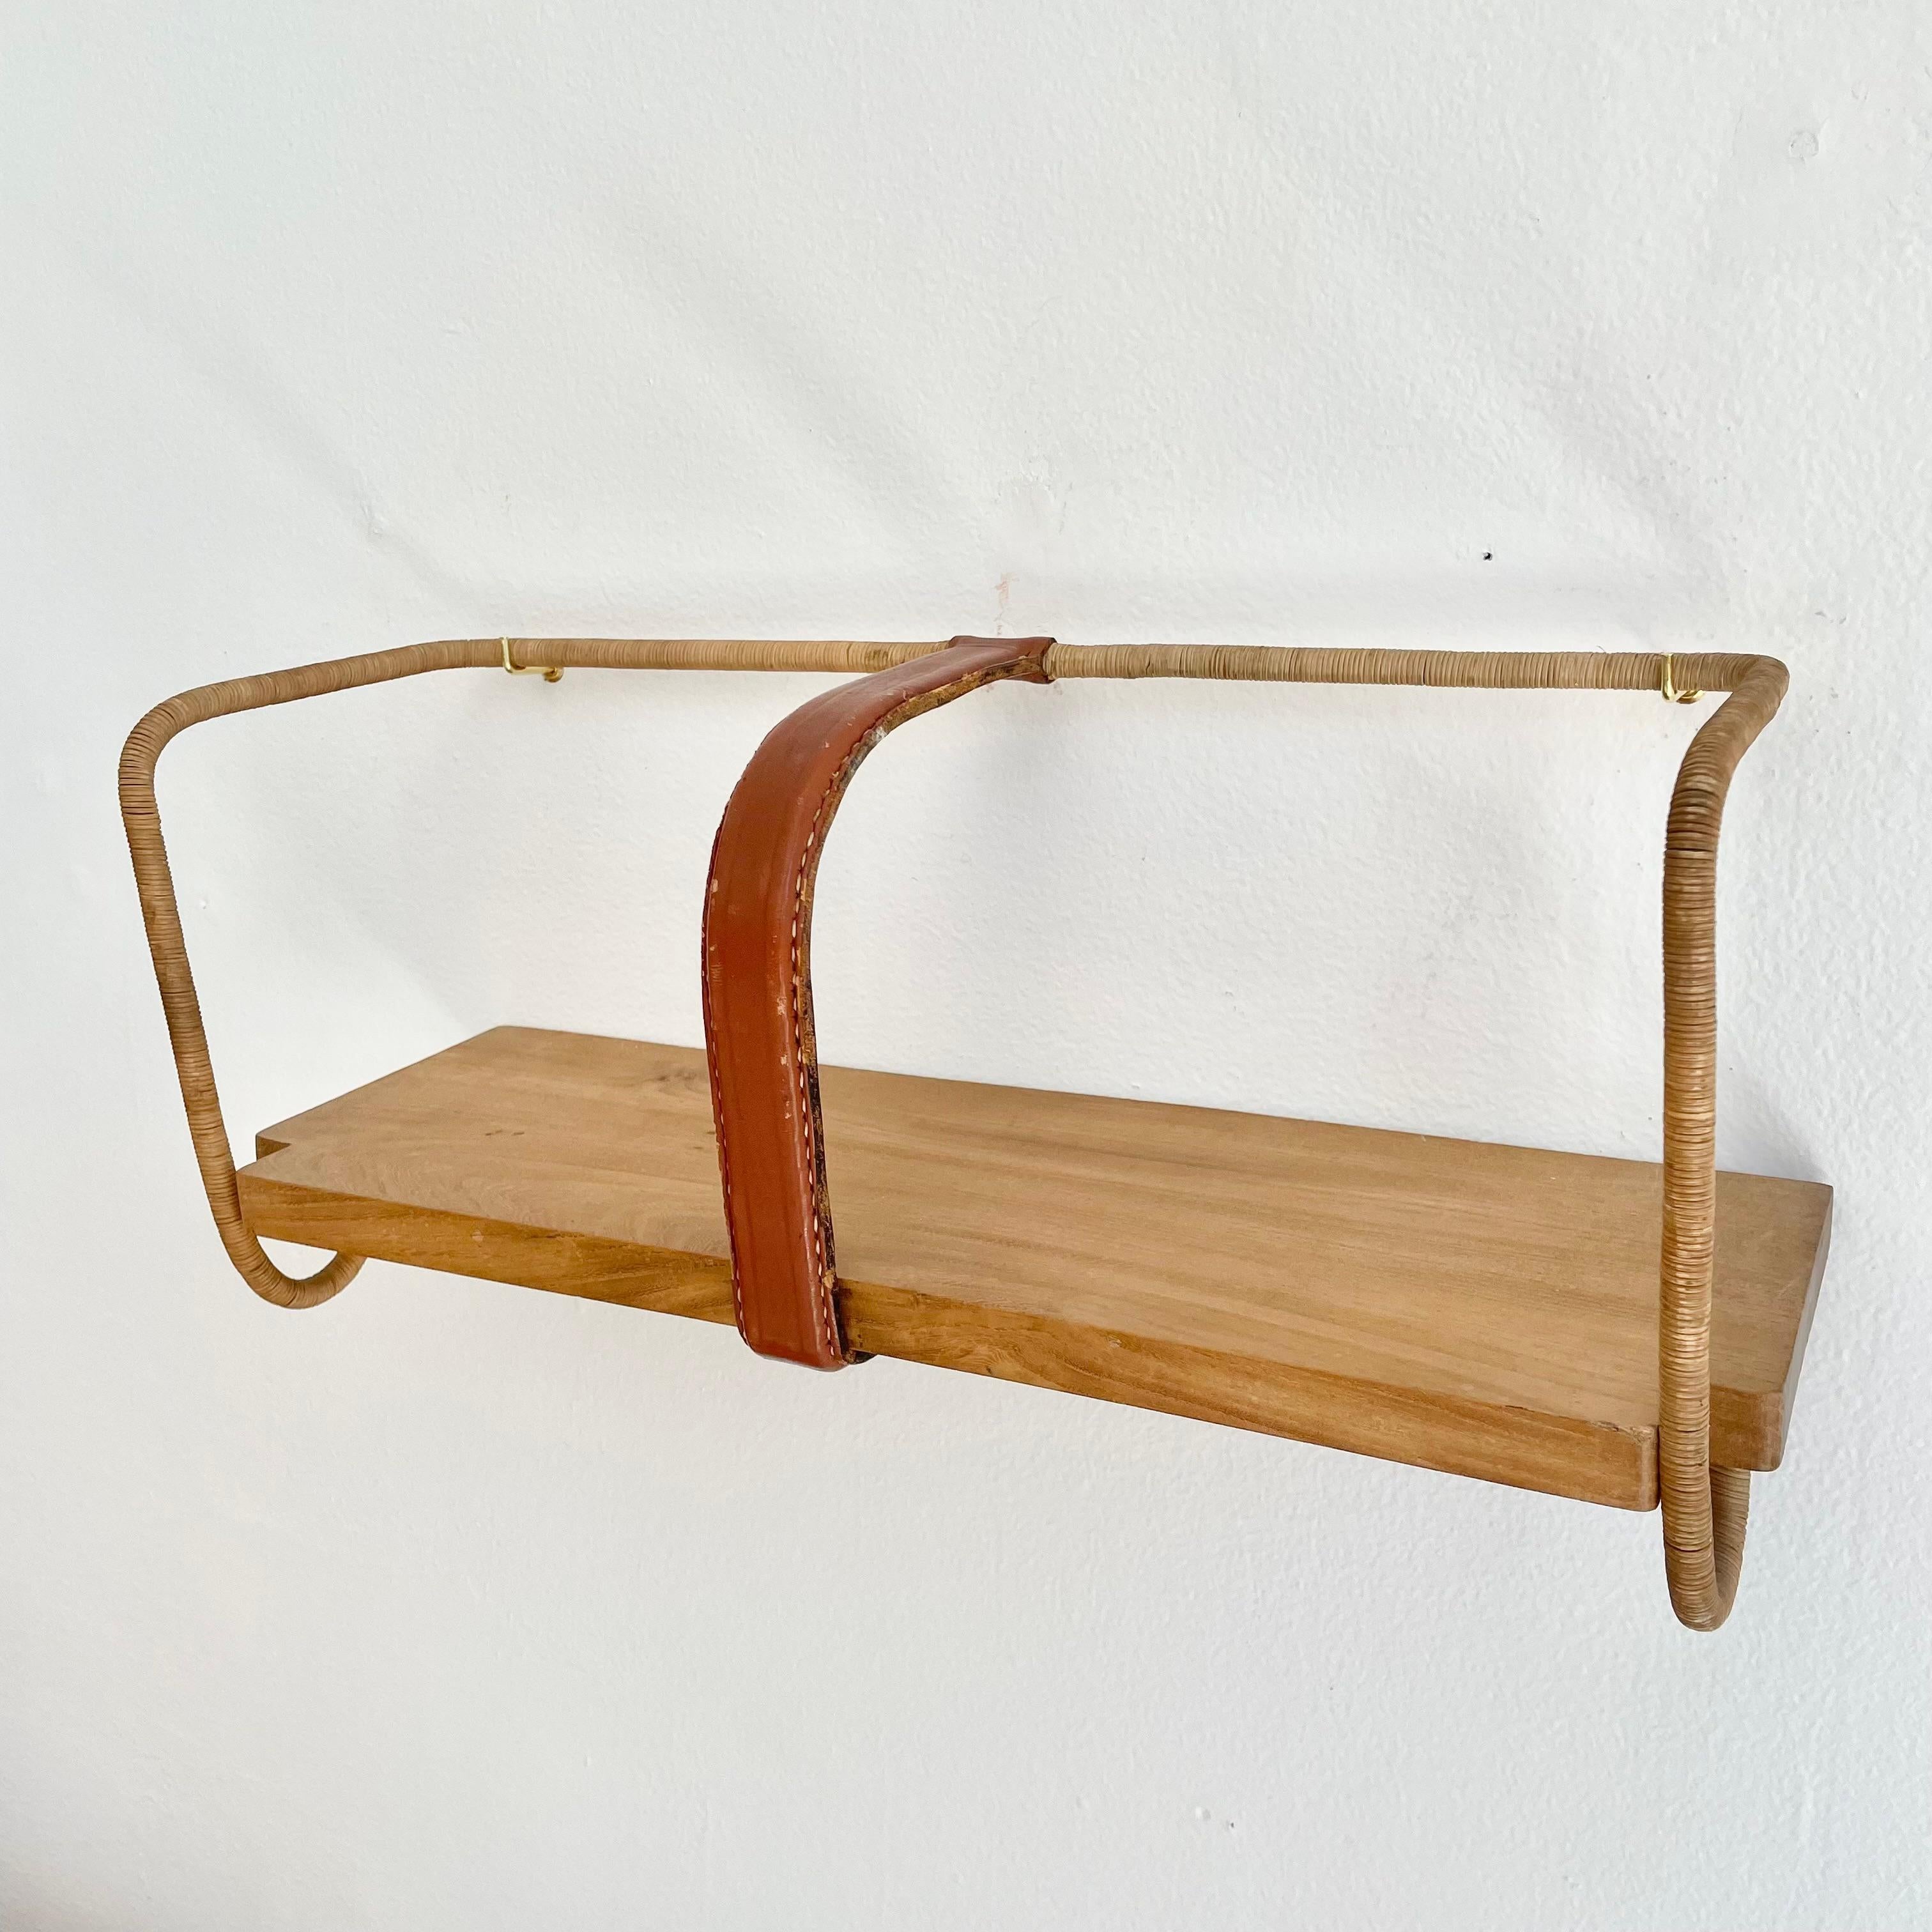 Jacques Adnet Leather, Wood and Twine Shelf, 1950s France For Sale 8